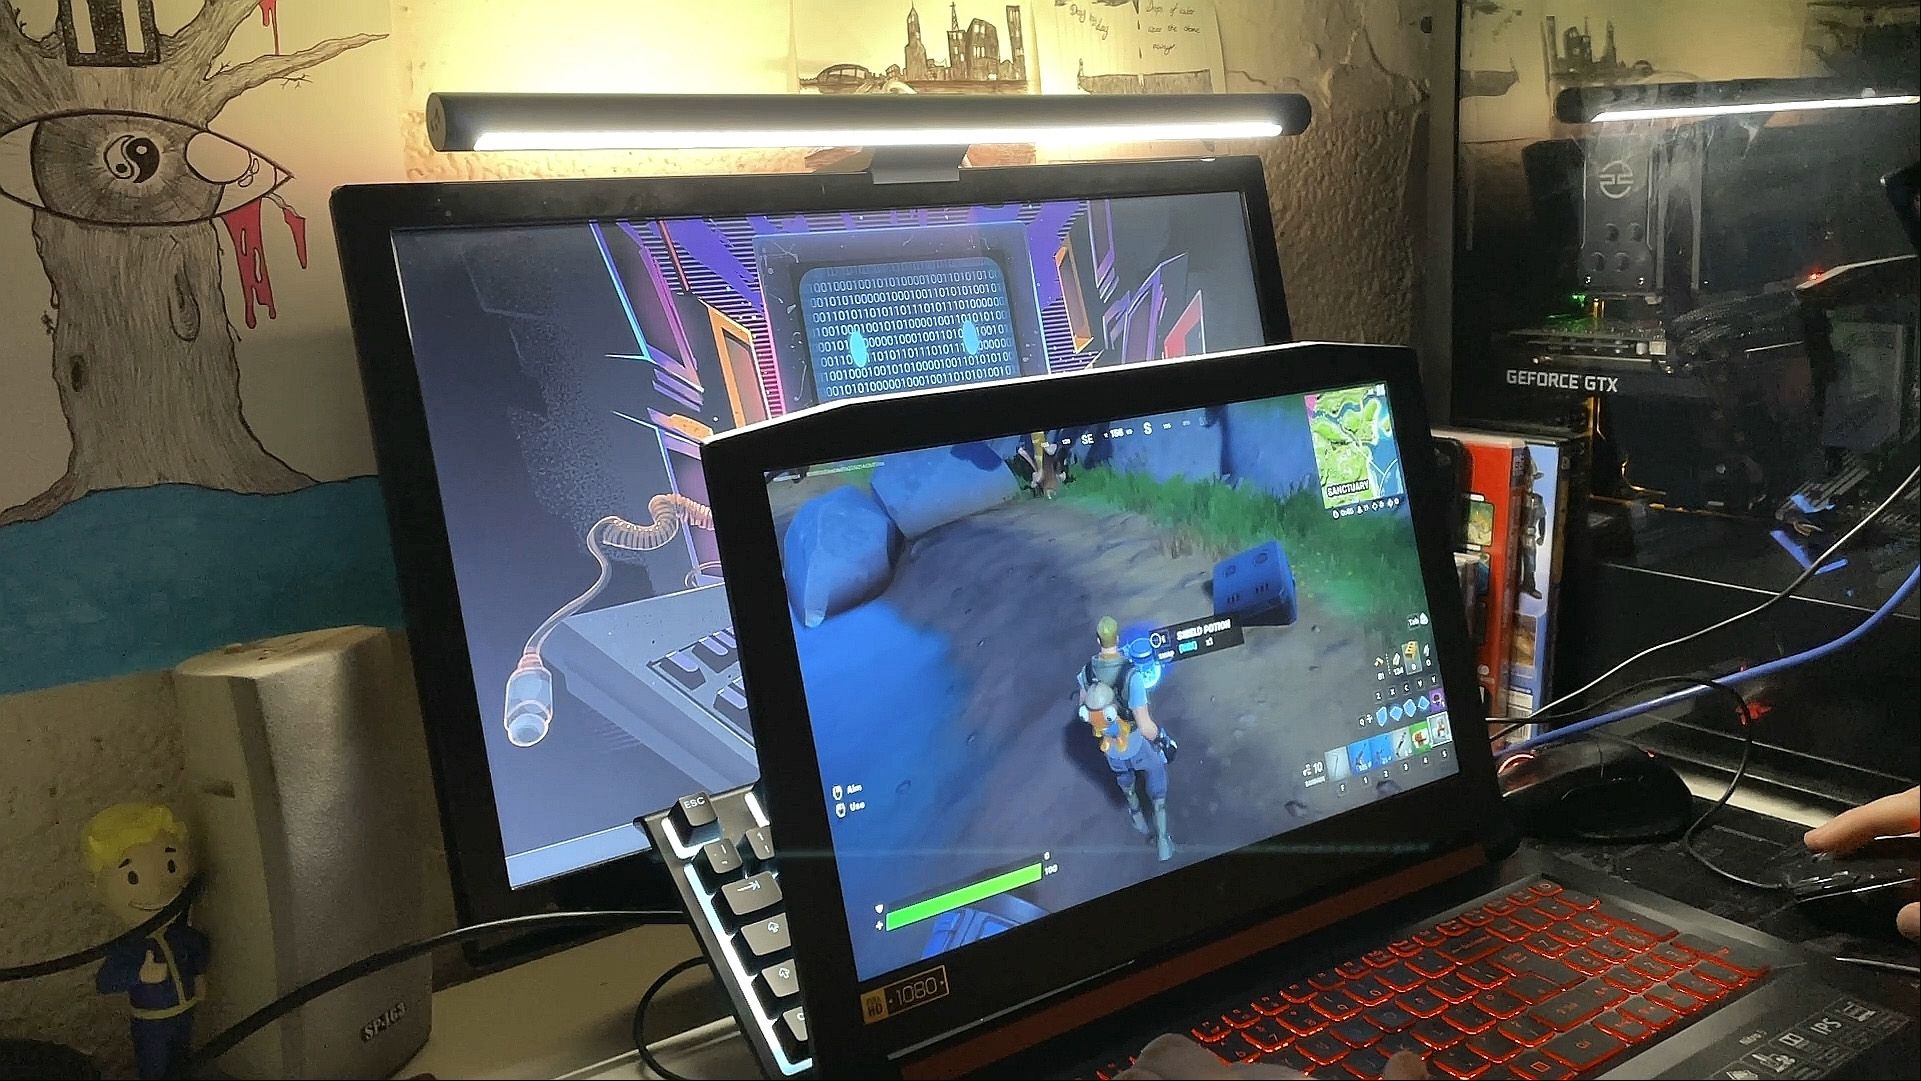 Yeelight LED Screen Light Bar Pro on monitor with laptop playing fornite